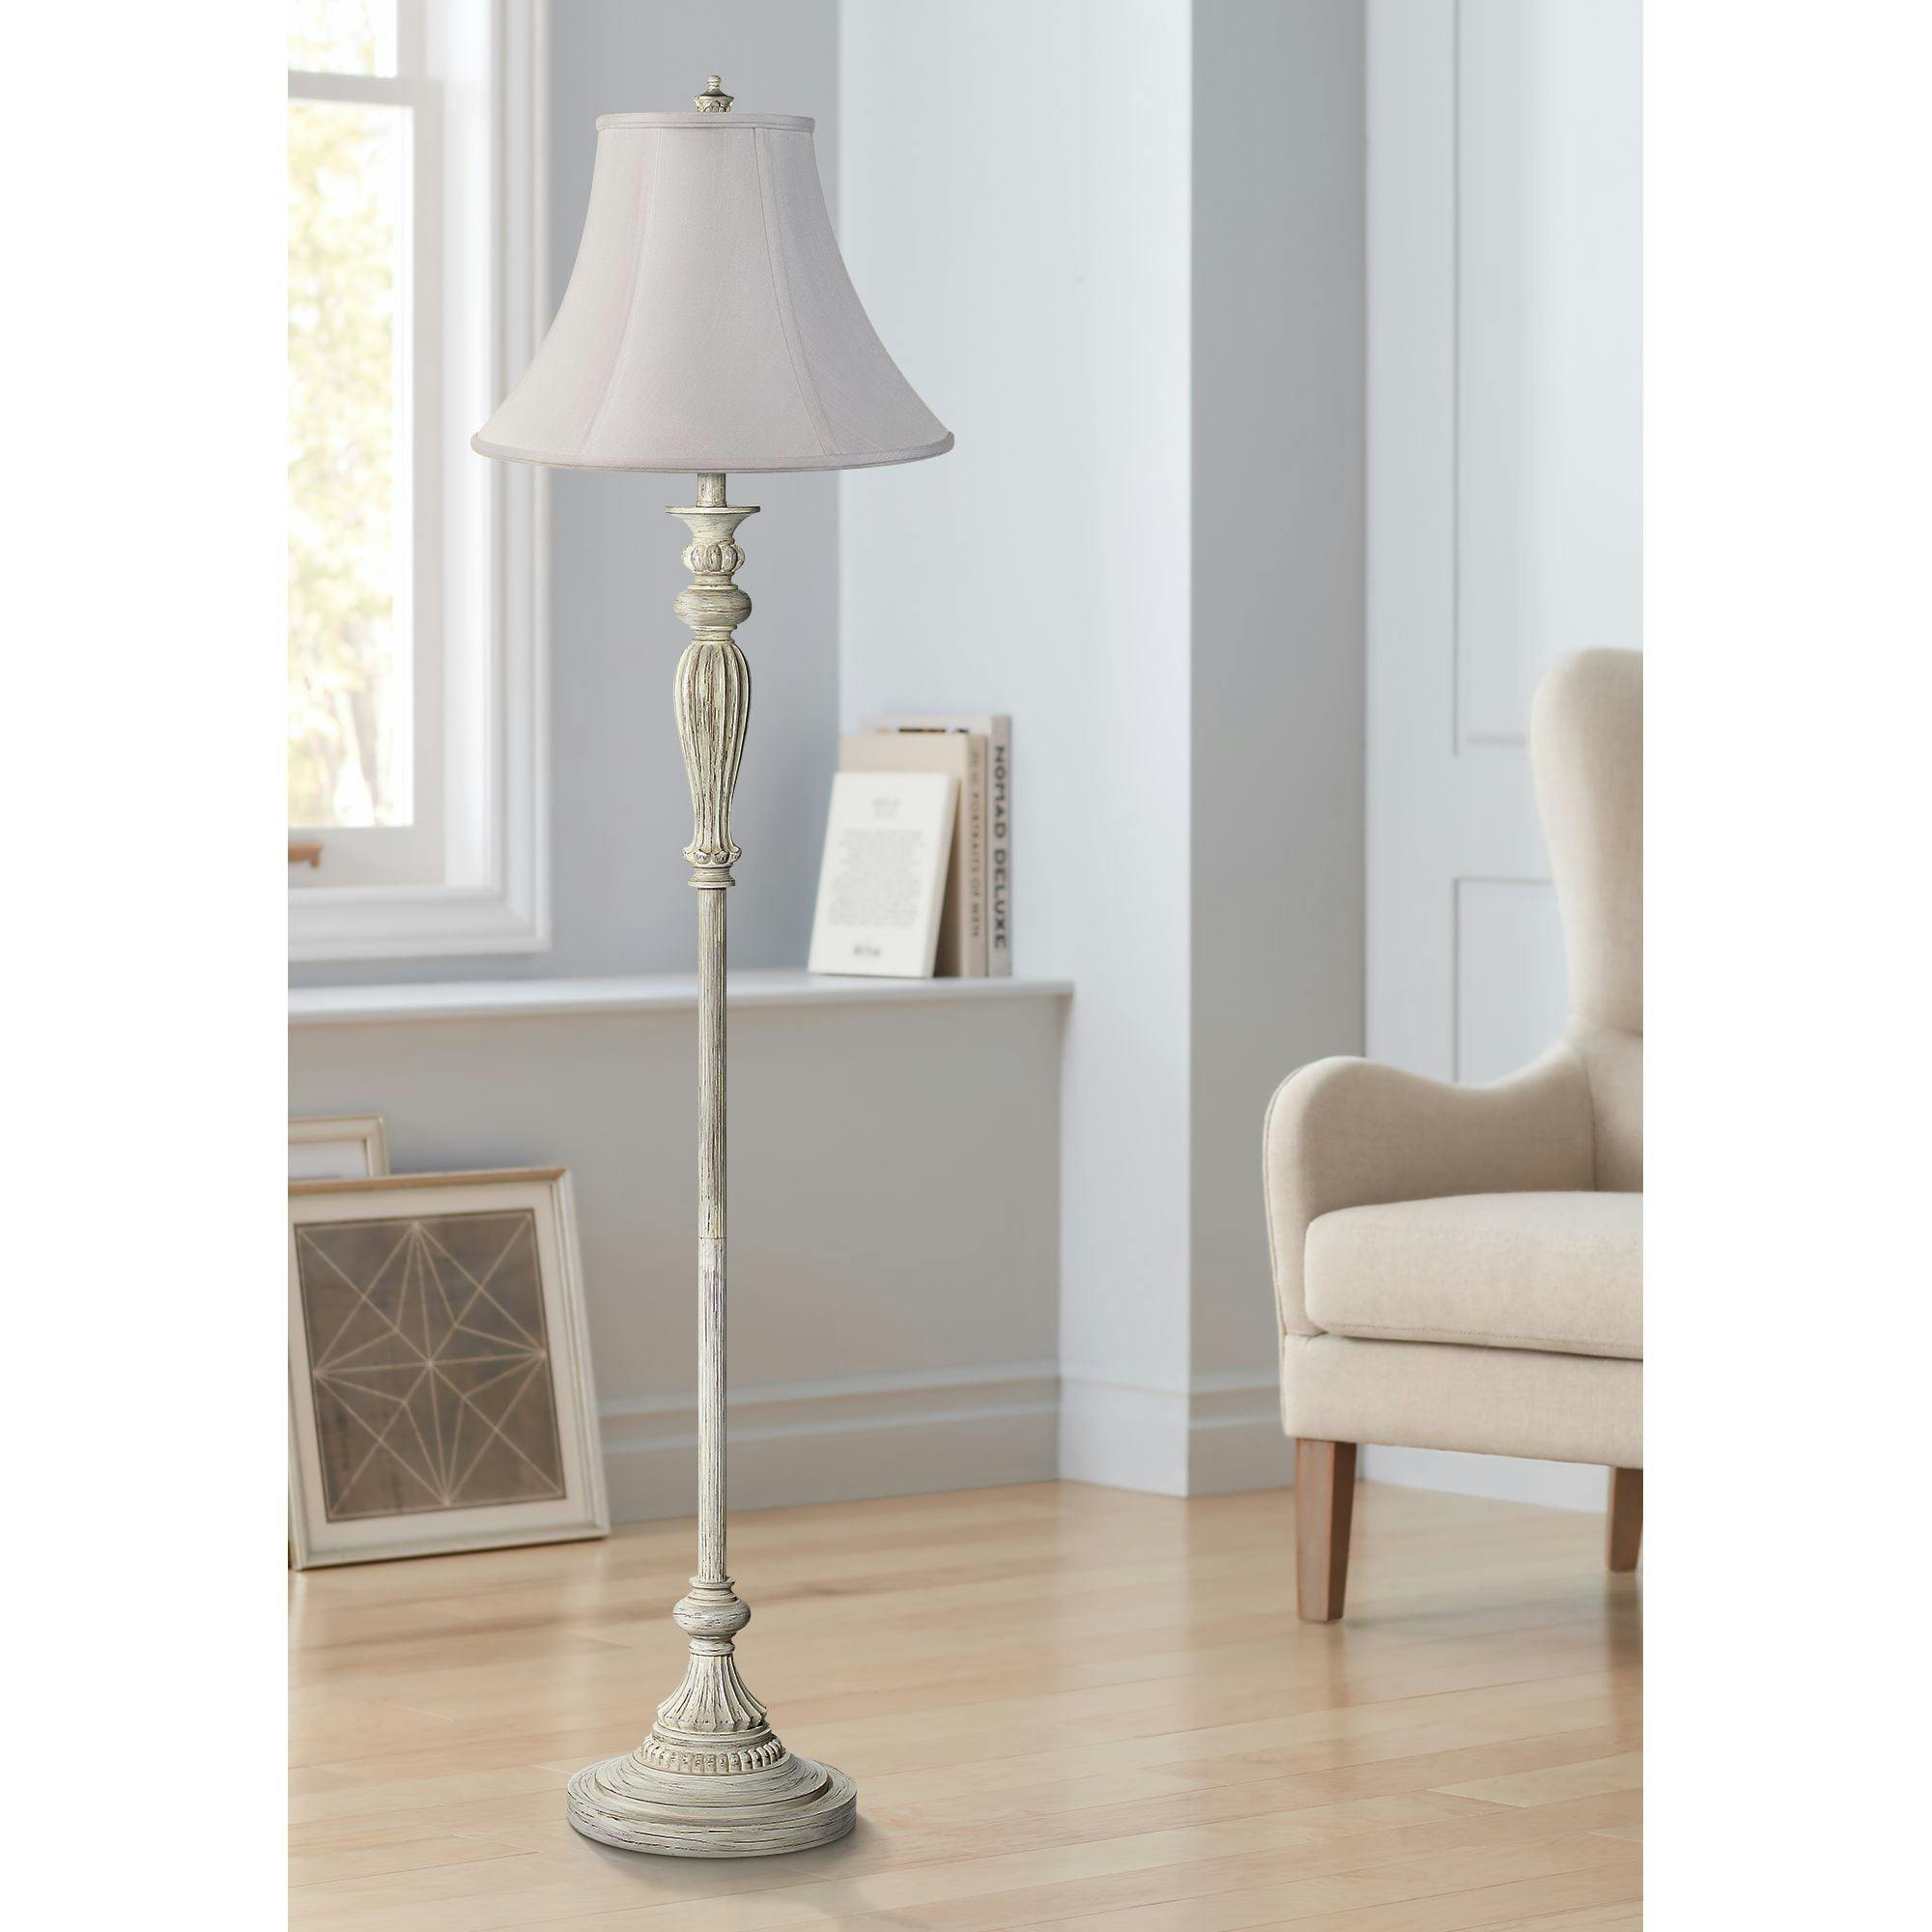 Antique White Washed 60" Floor Lamp with Fabric Bell Shade